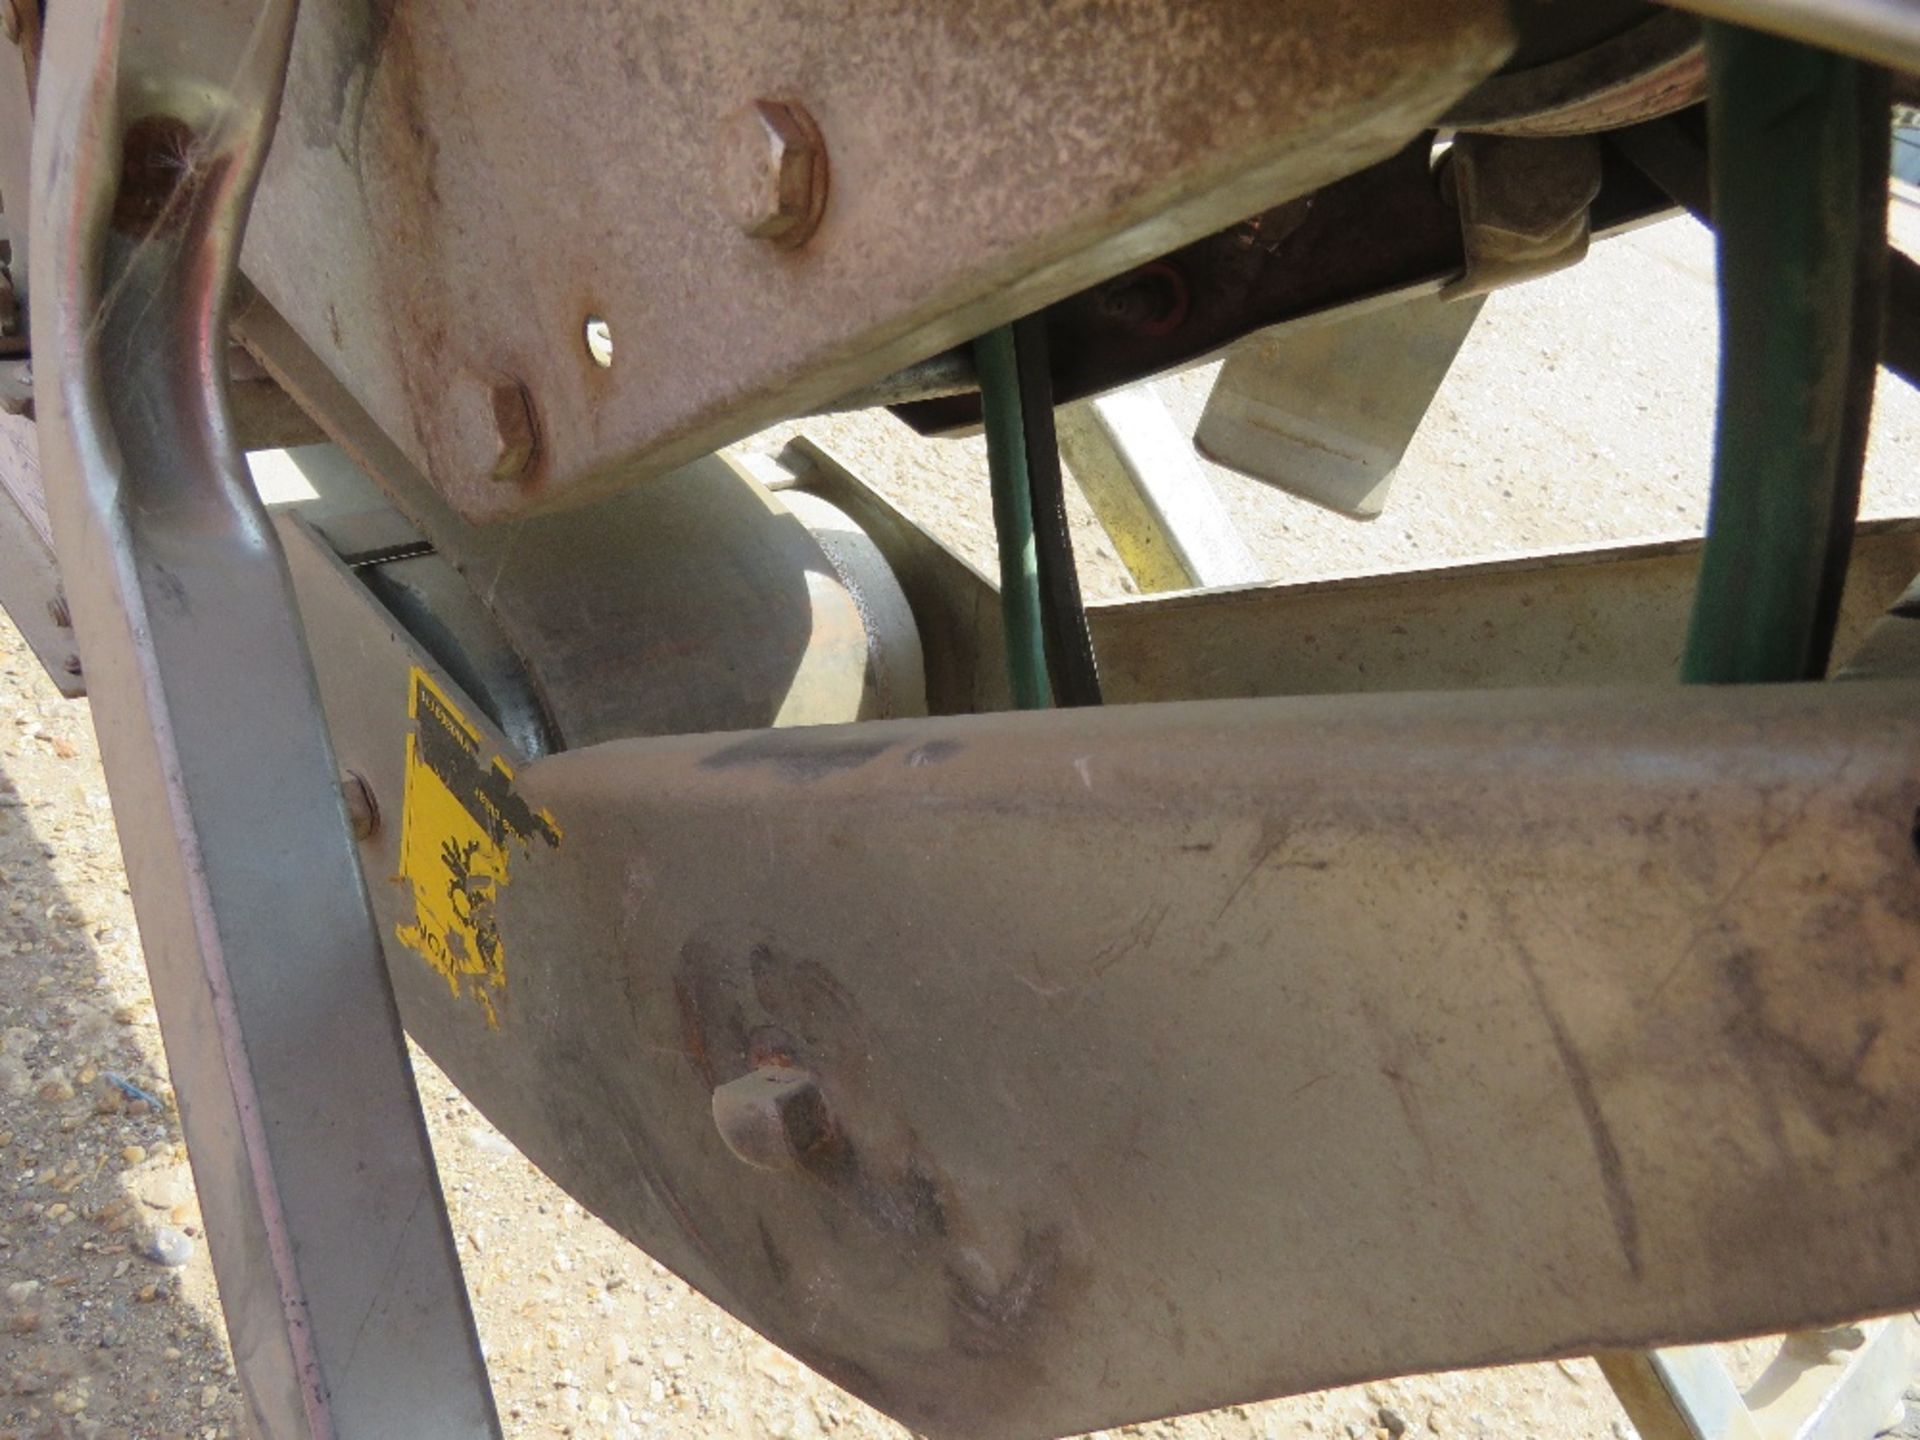 BUMPA PETROL ENGINED TILE HOIST WITH HONDA ENGINE, 32FT OVERALL LENGTH APPROX. - Image 14 of 15